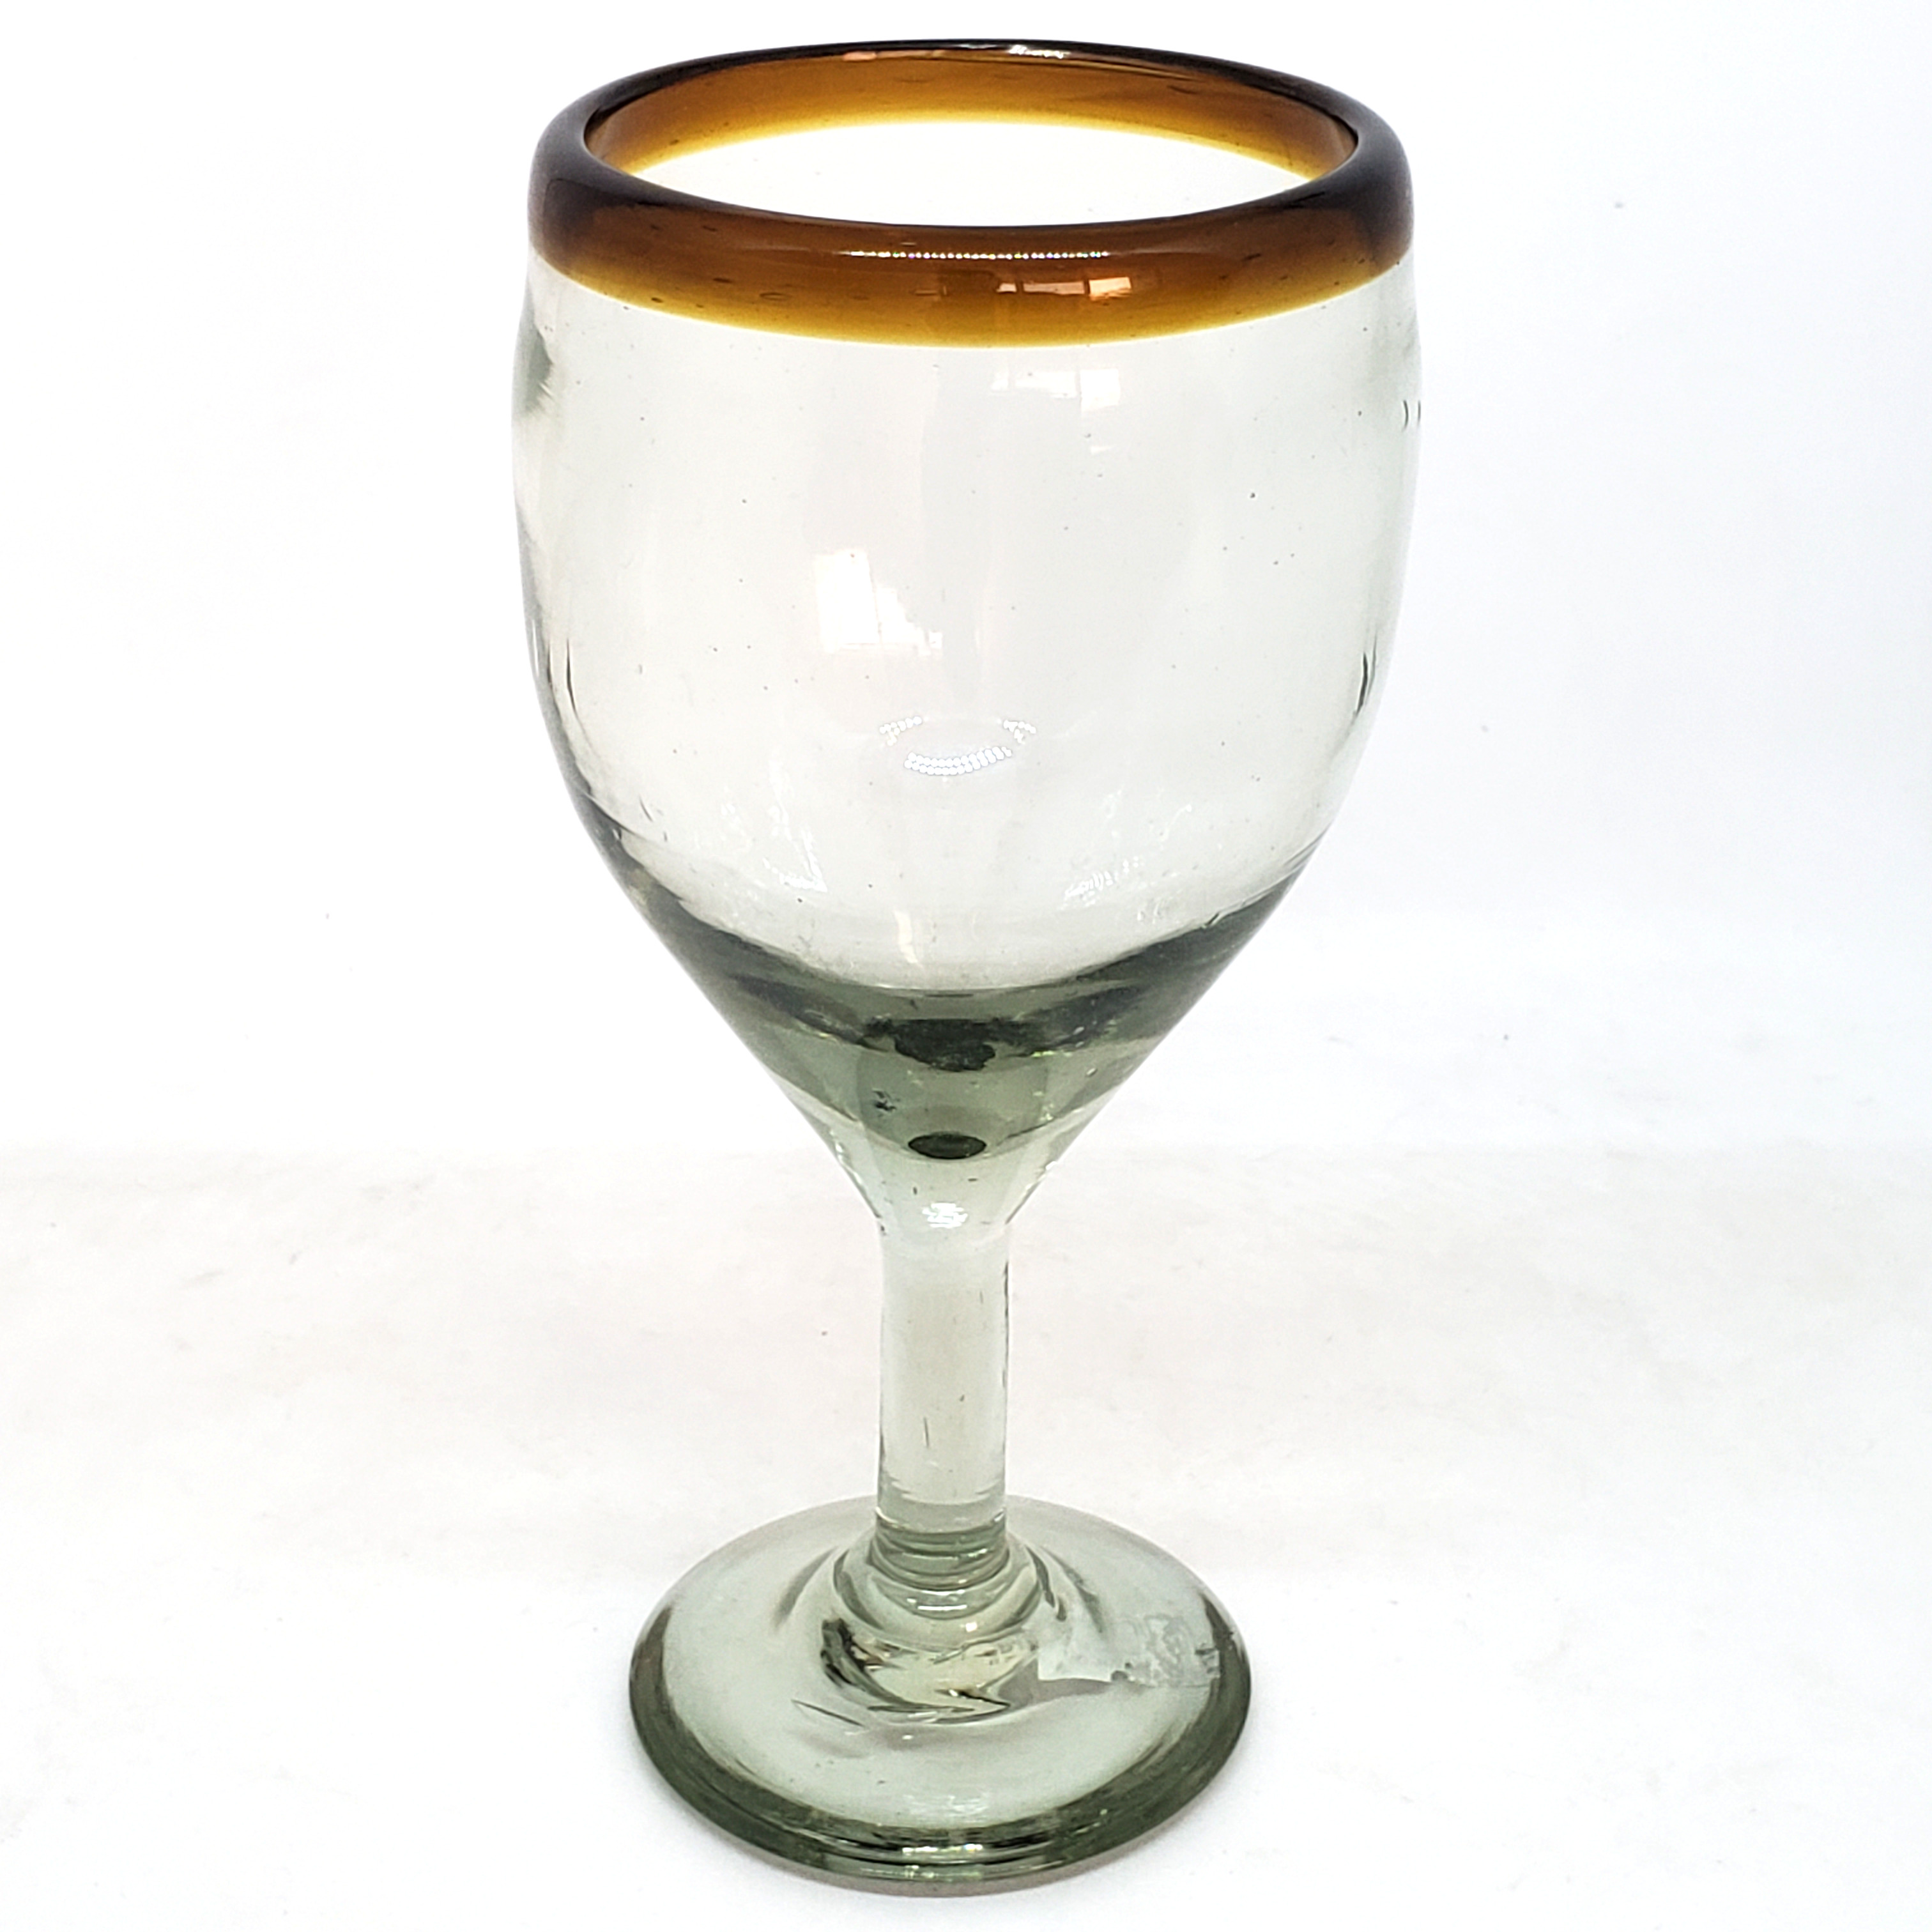 MEXICAN GLASSWARE / Amber Rim 13 oz Wine Glasses (set of 6) / Capture the bouquet of fine red wine with these wine glasses bordered with a bright, amber rim.